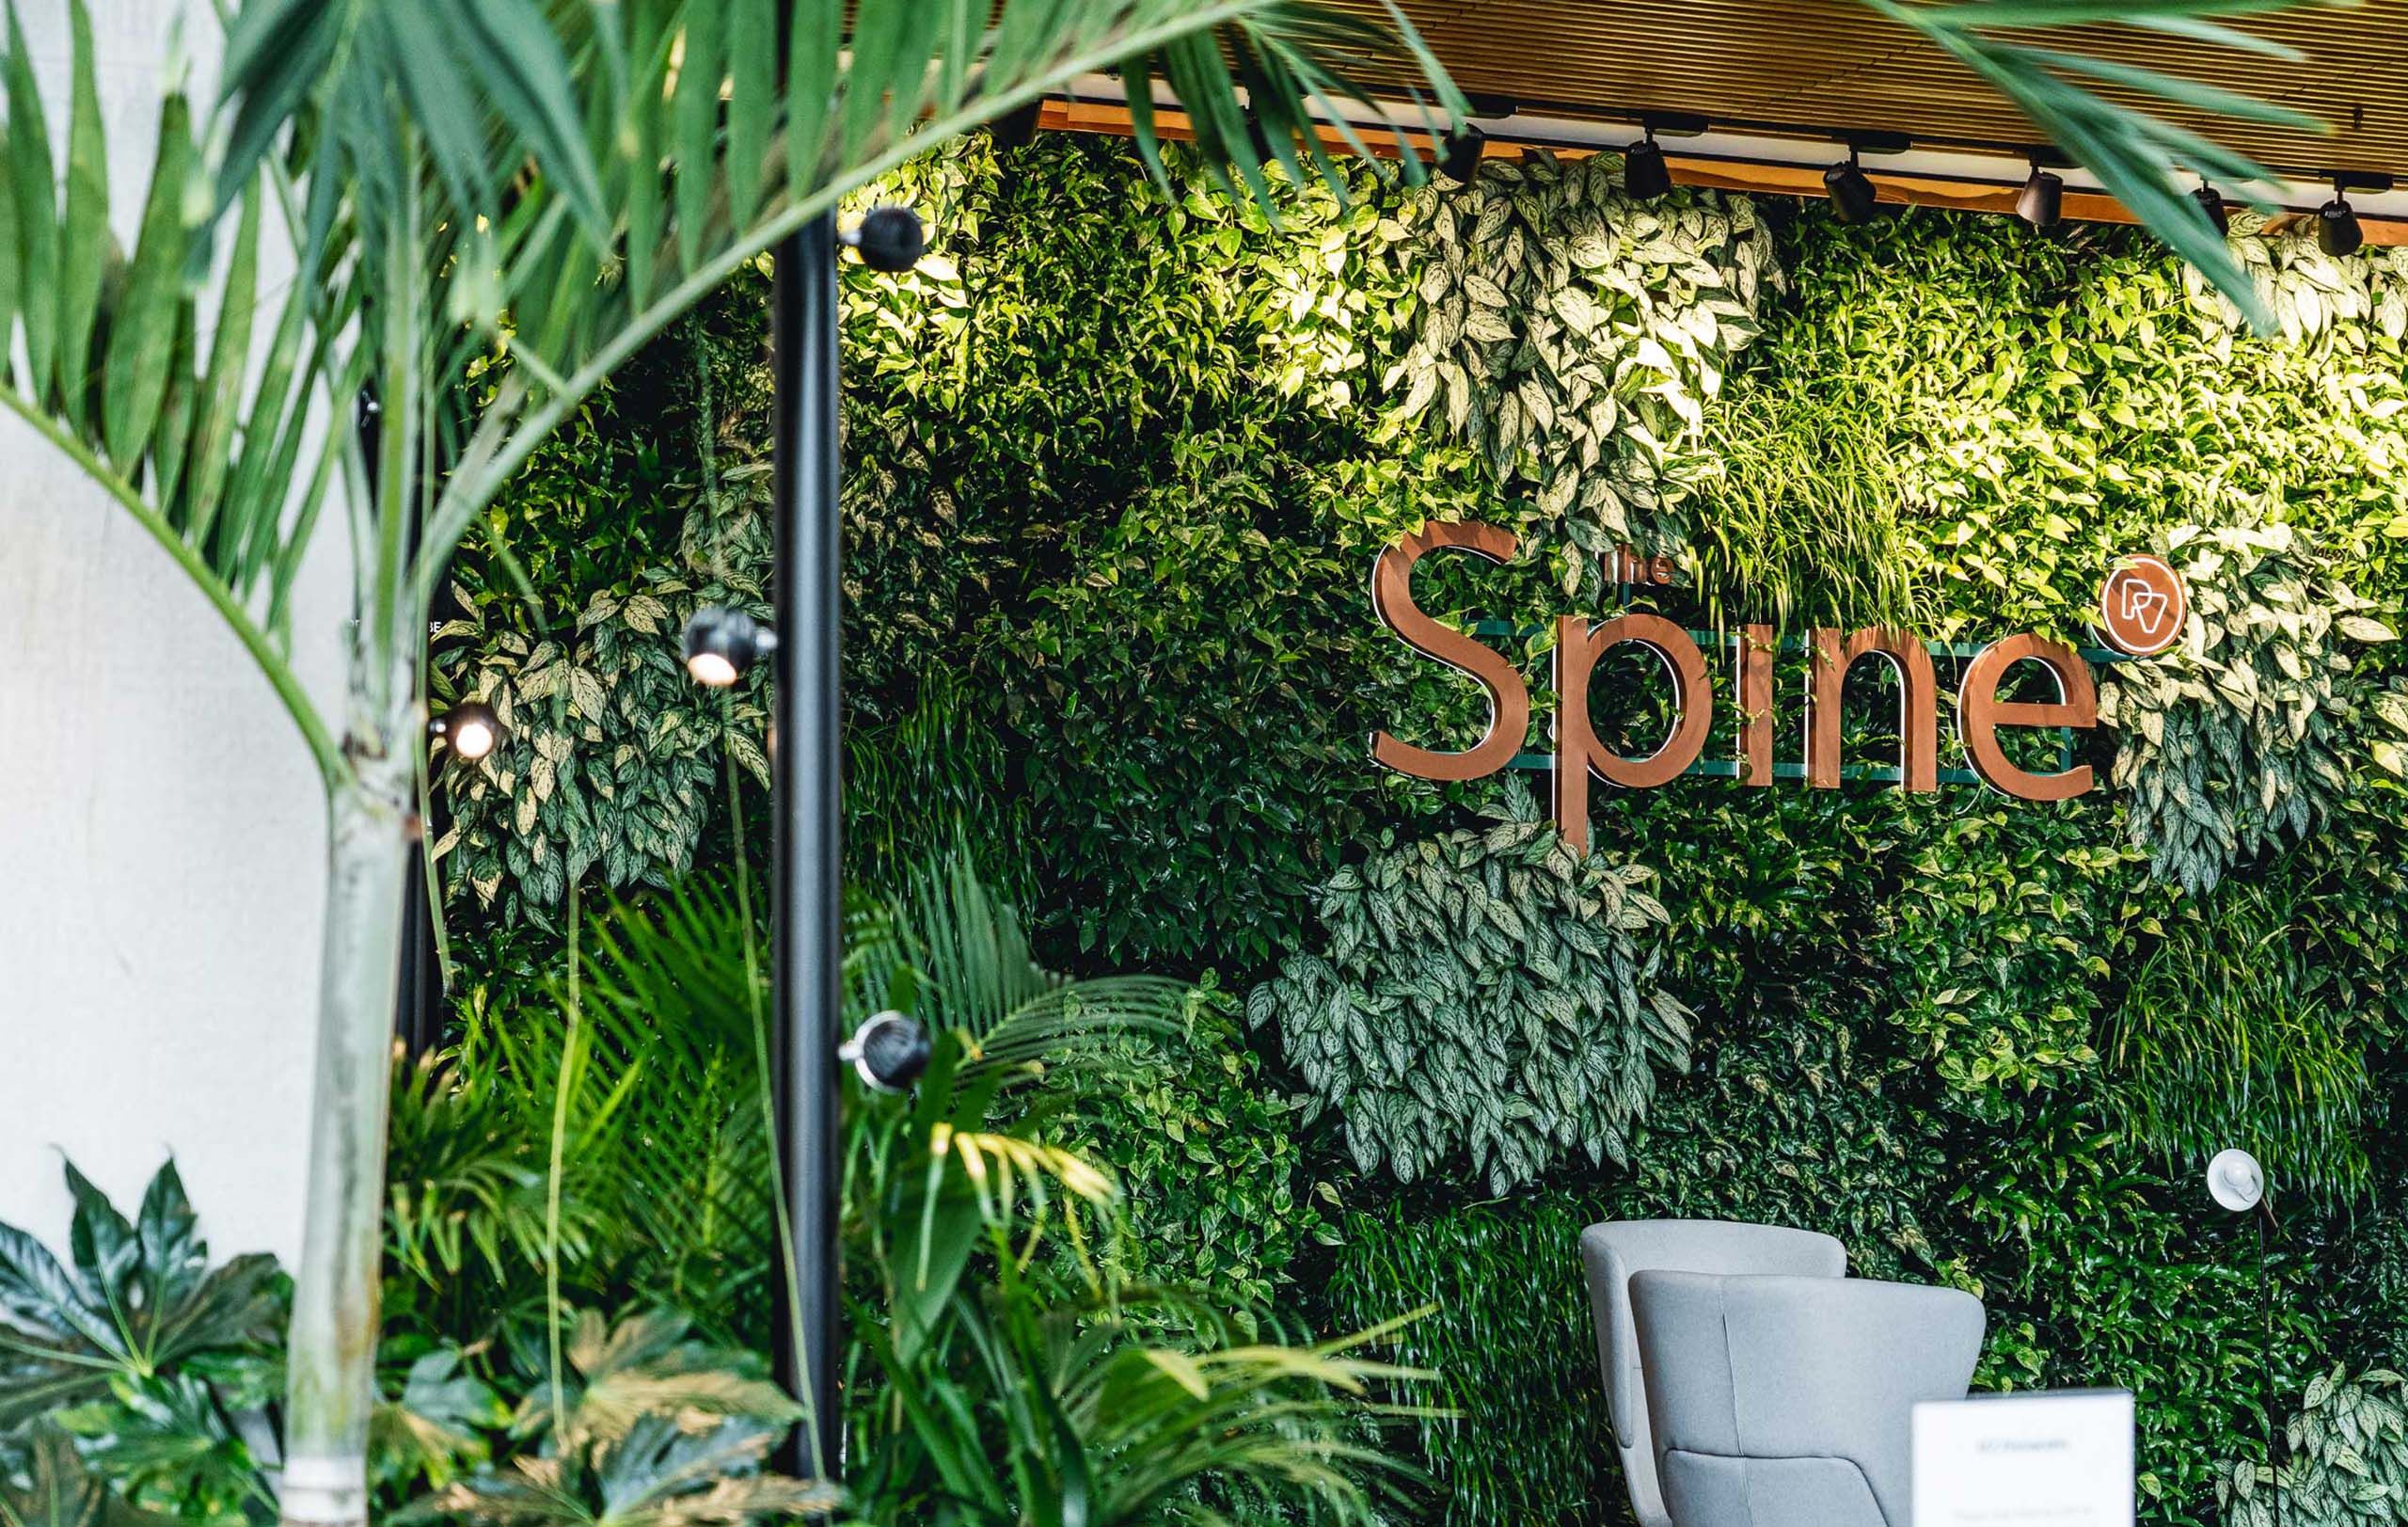 Spaces at the Spine’s sustainable pledges on #EarthDay